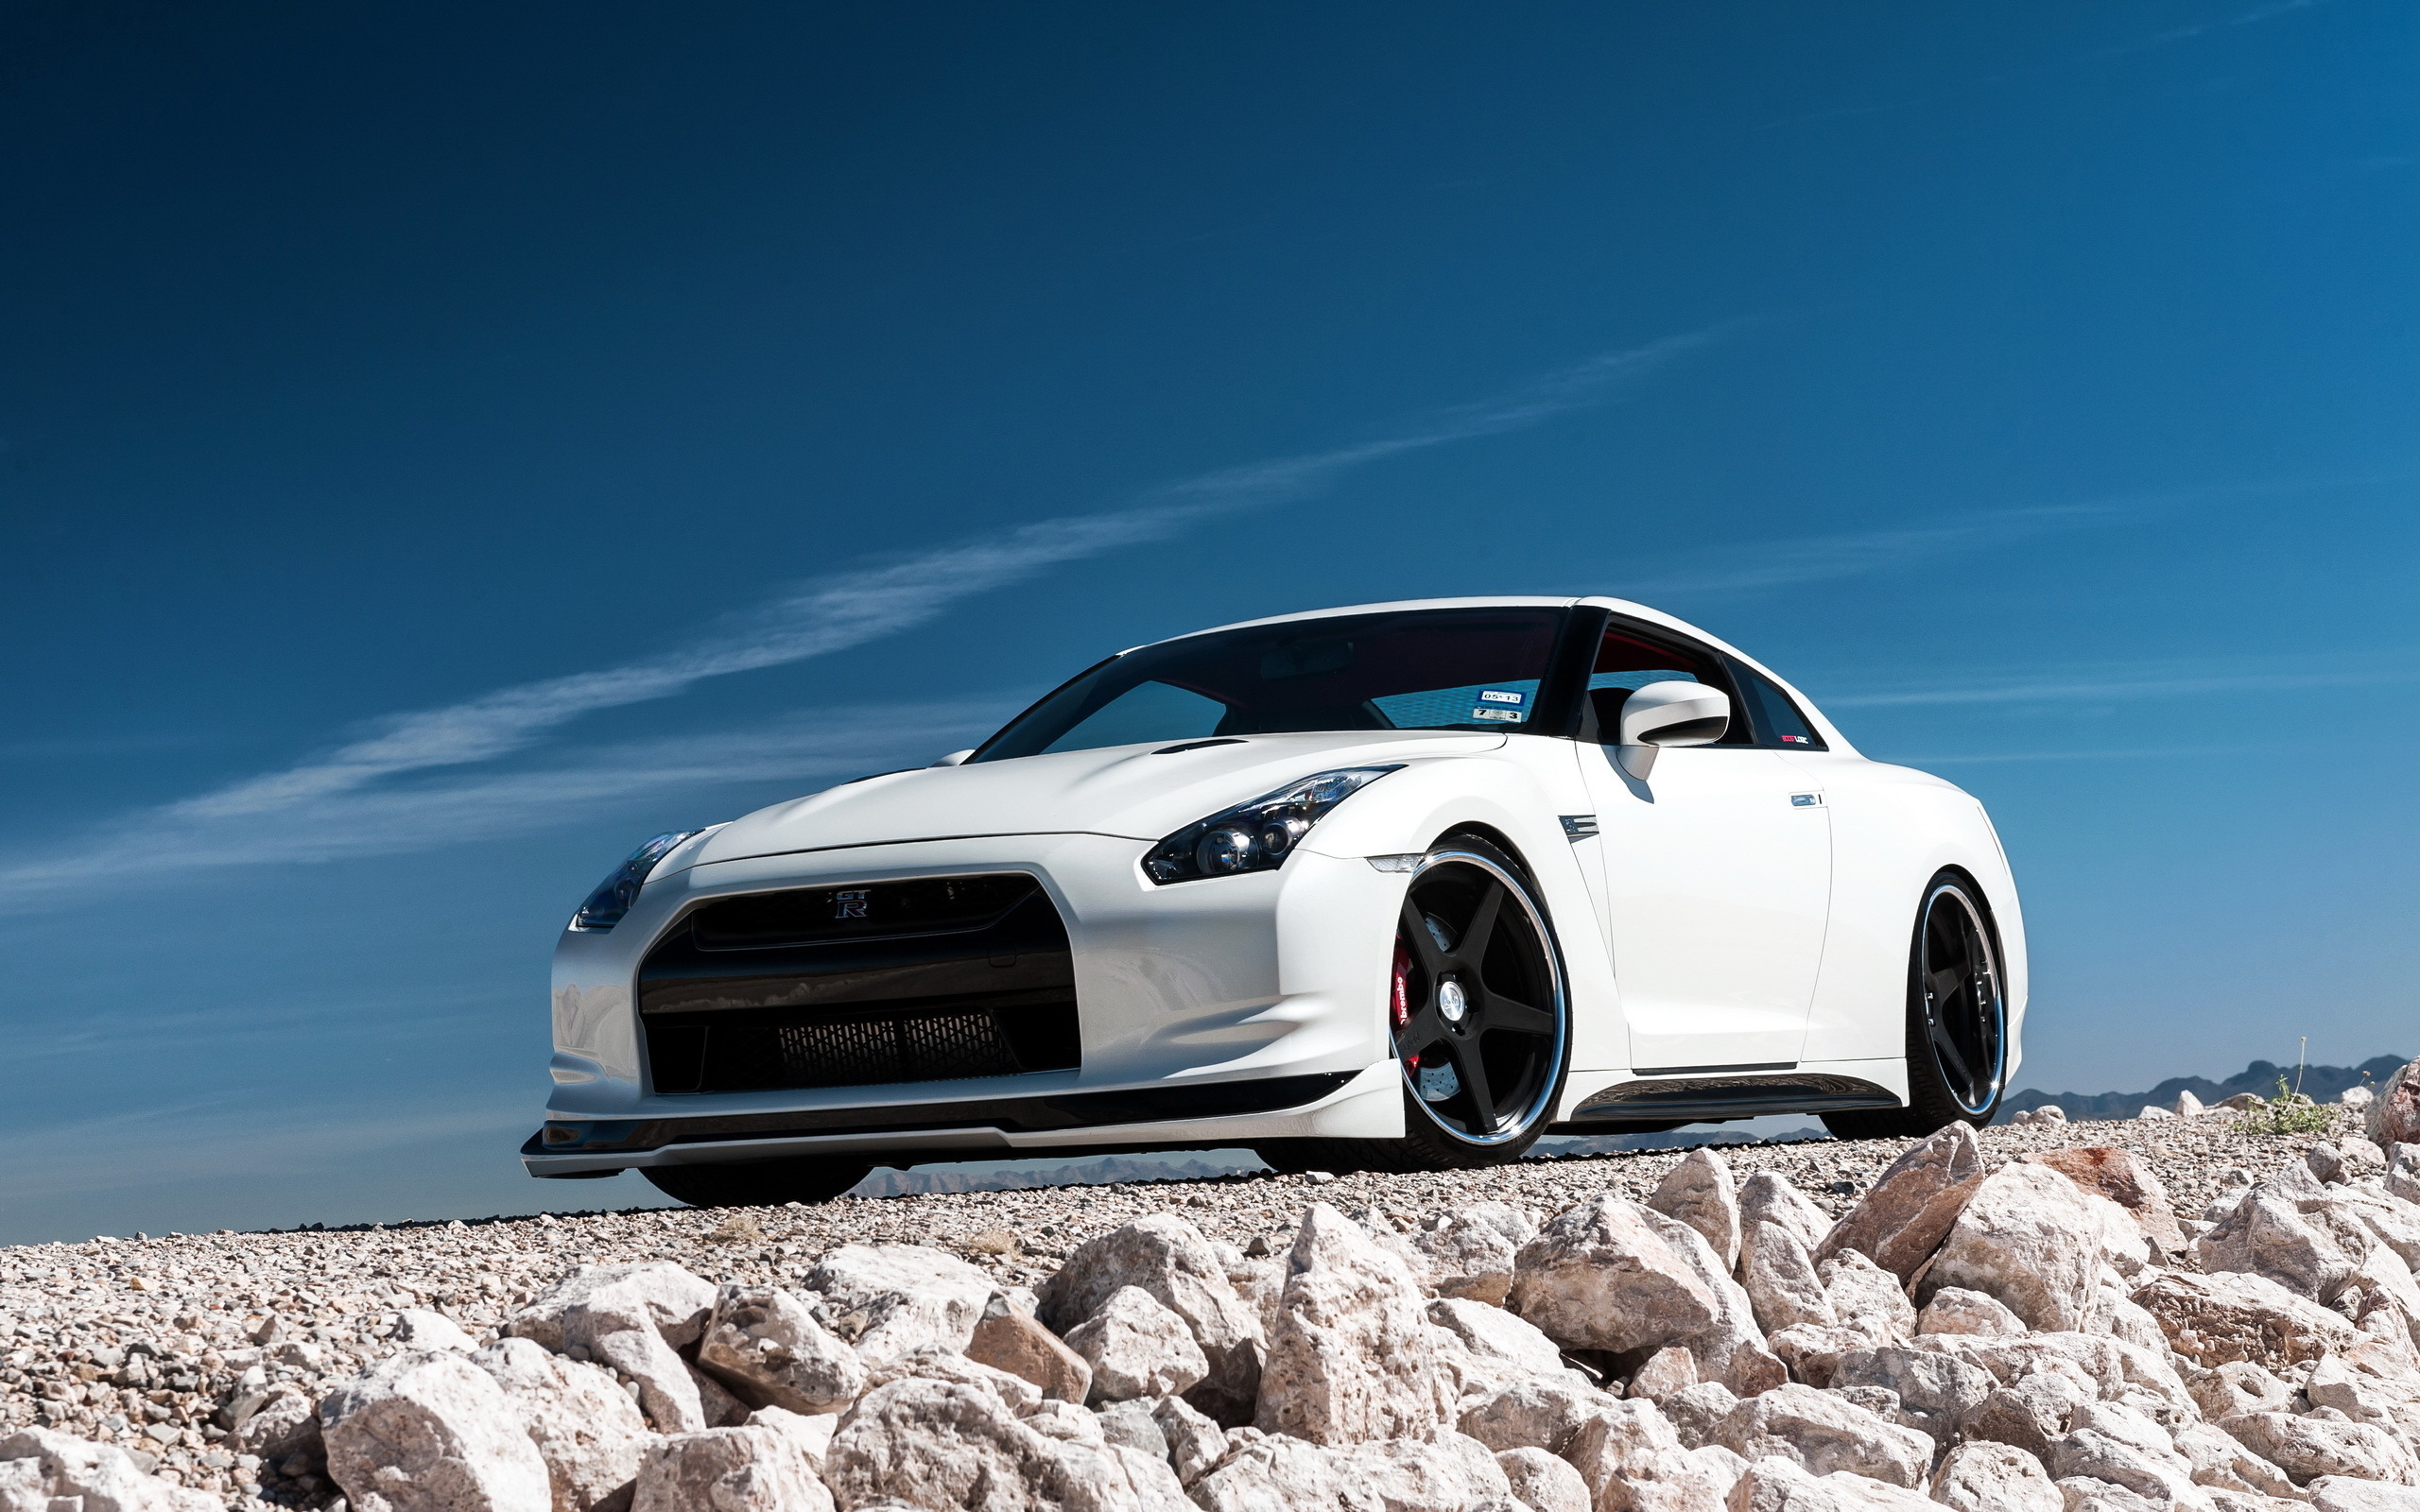 Vehicles Nissan GT-R HD Wallpaper | Background Image